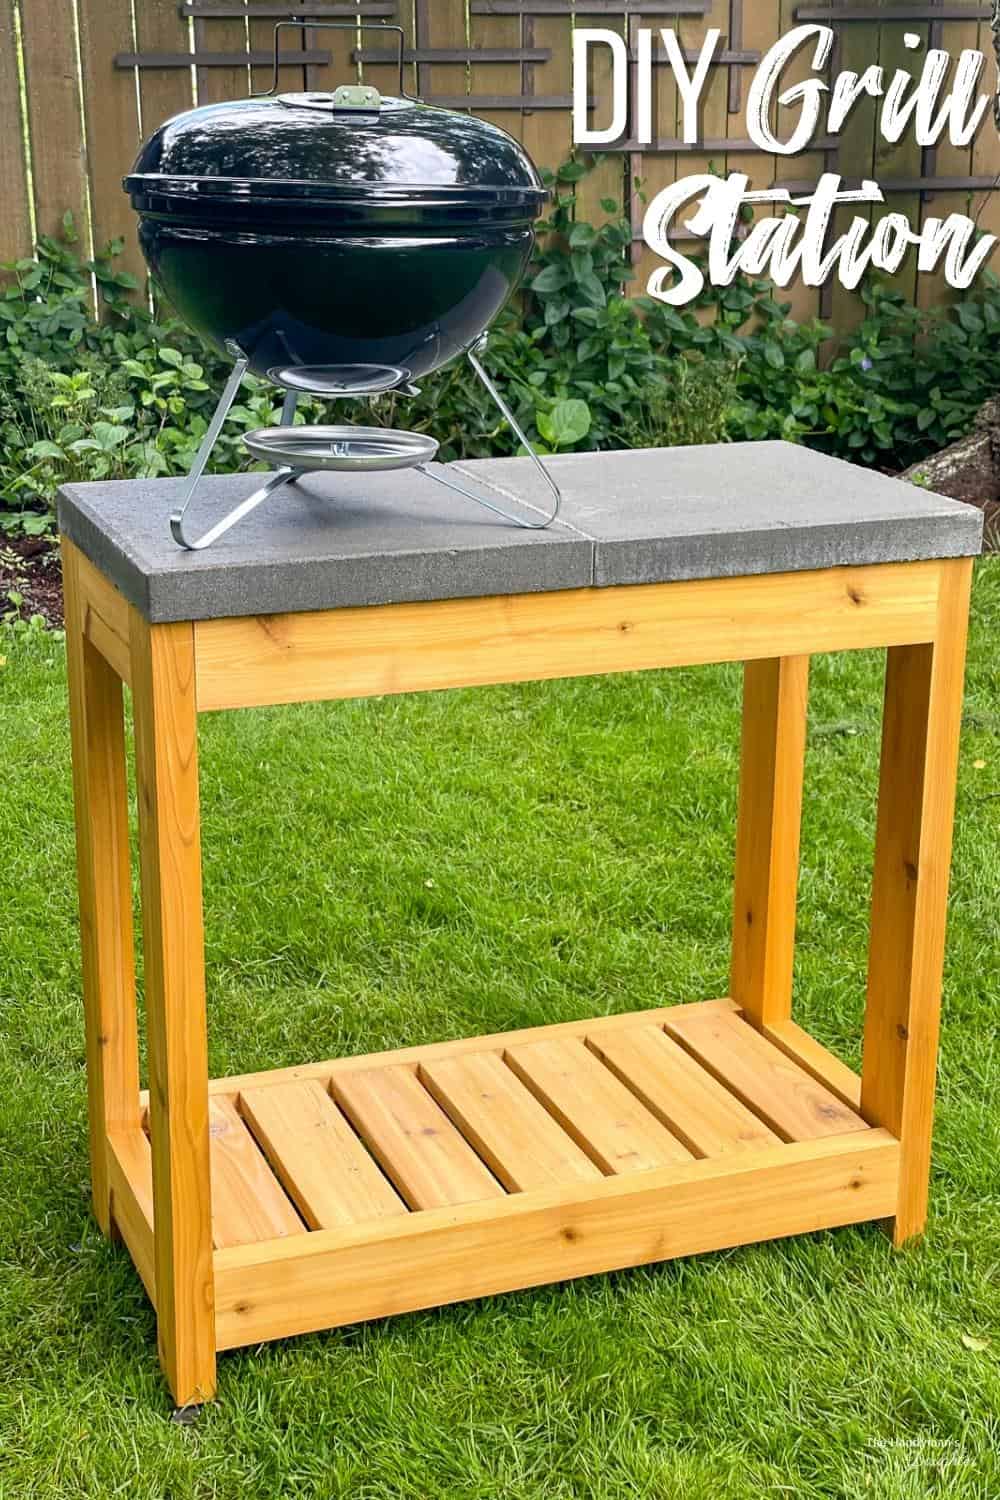 https://www.thehandymansdaughter.com/wp-content/uploads/2022/06/DIY-Grill-Station-Pin-1.jpeg